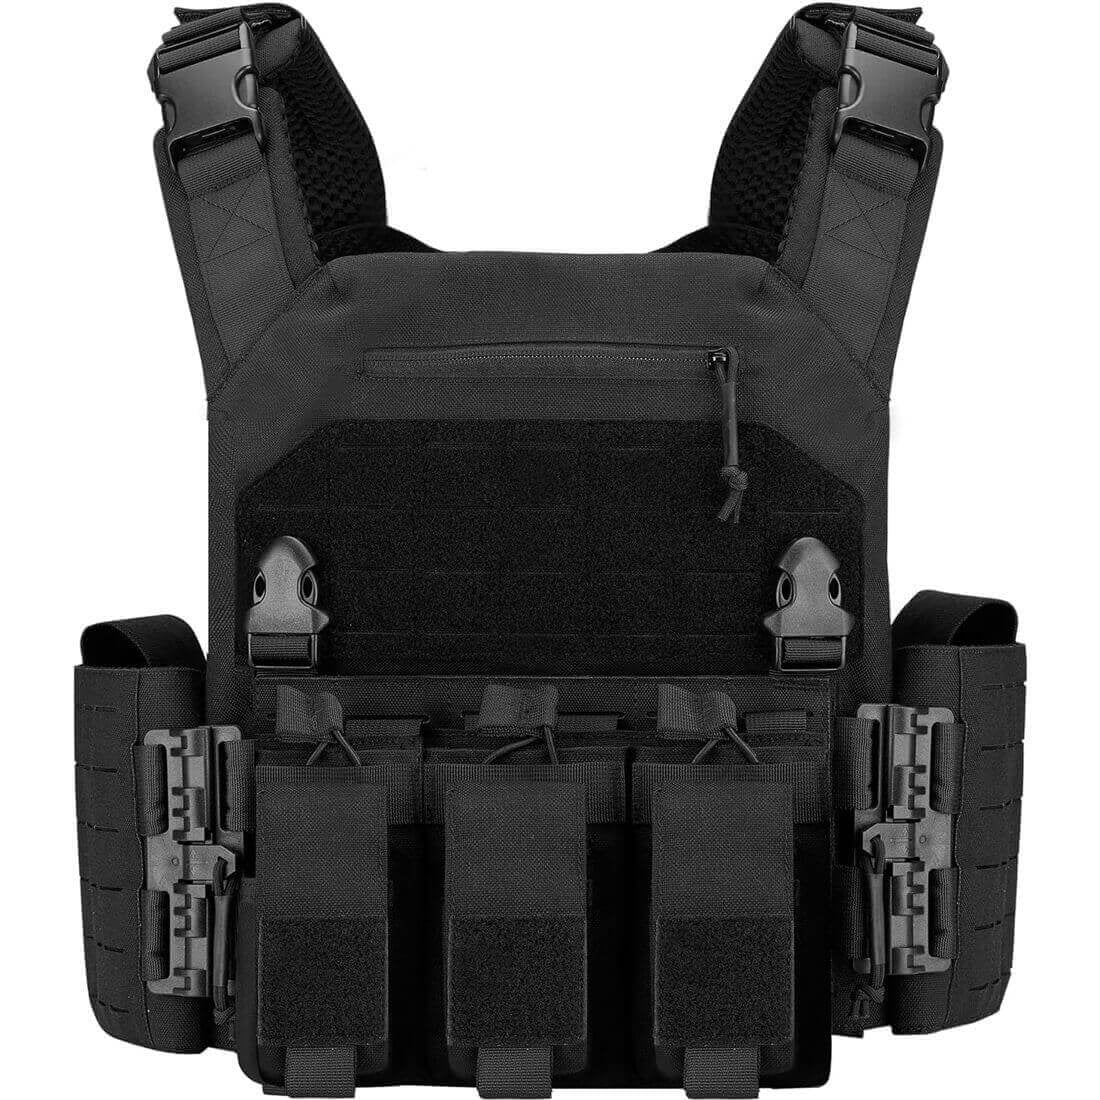 GloryFire Quick Release Lightweight Tactical Vest for Training, 2 colors GLORYFIRE®